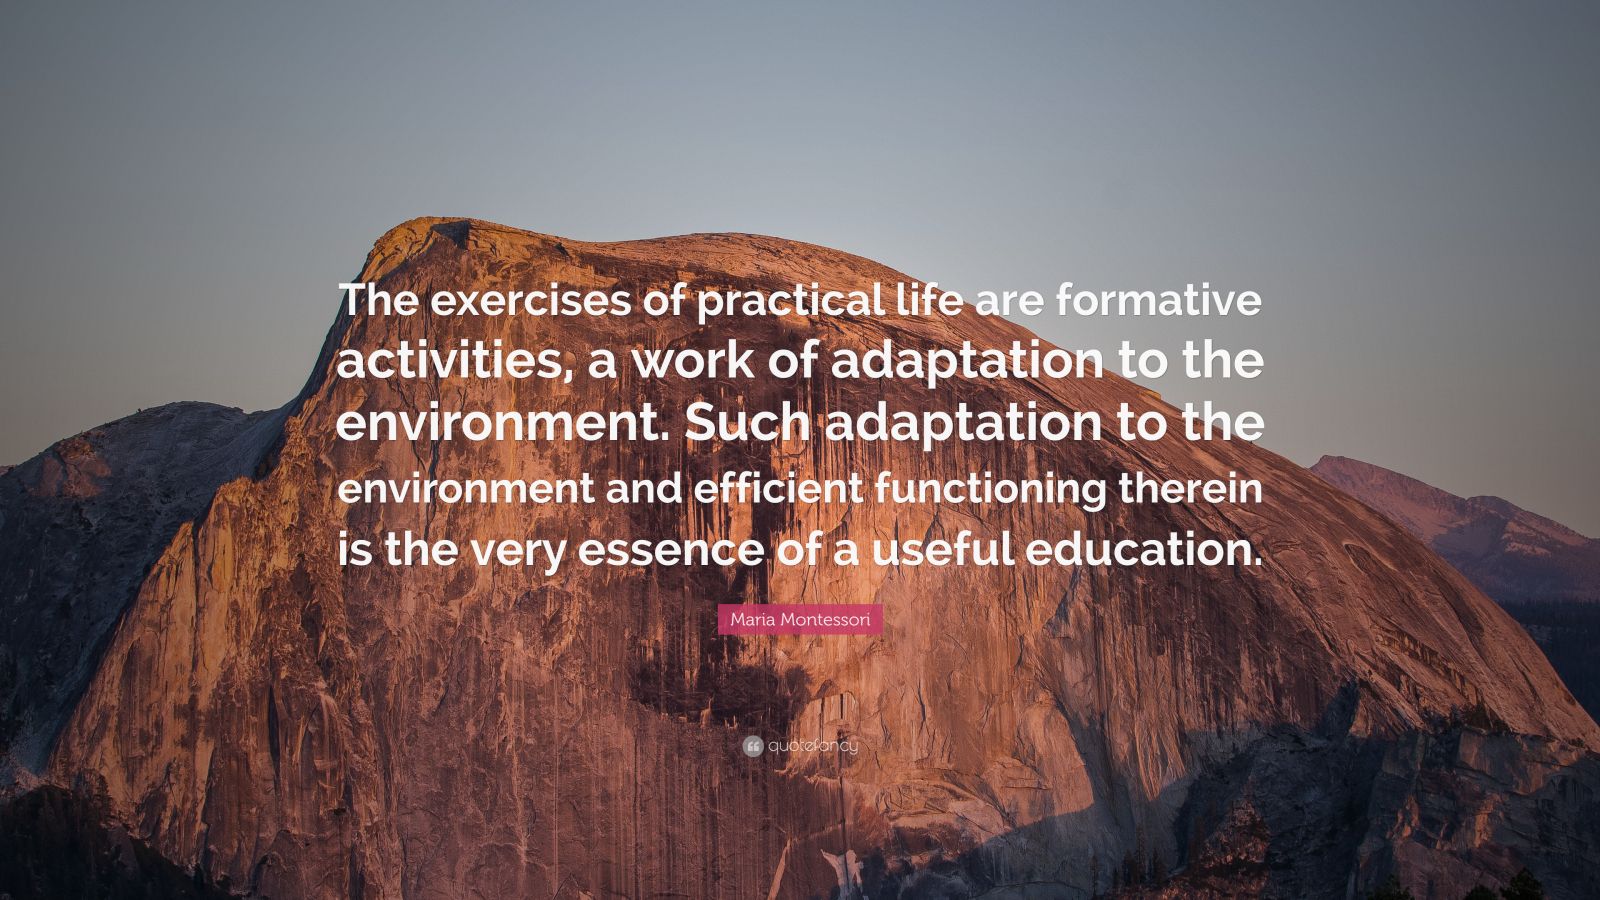 Maria Montessori Quote: "The exercises of practical life are formative activities, a work of ...